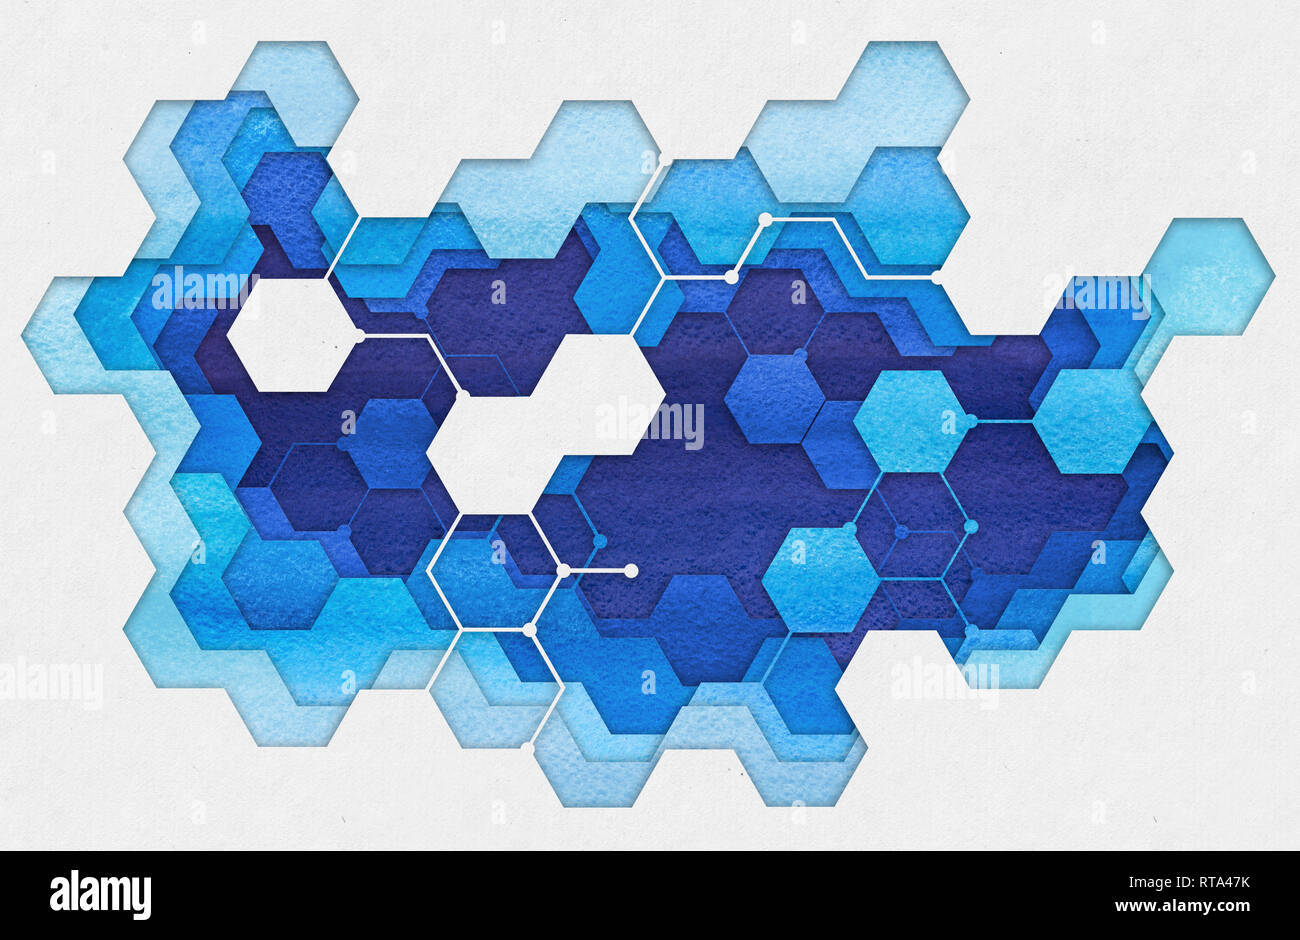 Abstract hand drawn illustration. Cutout hexagonal medicine applique from watercolor blue painted paper. Creative background. Stock Photo